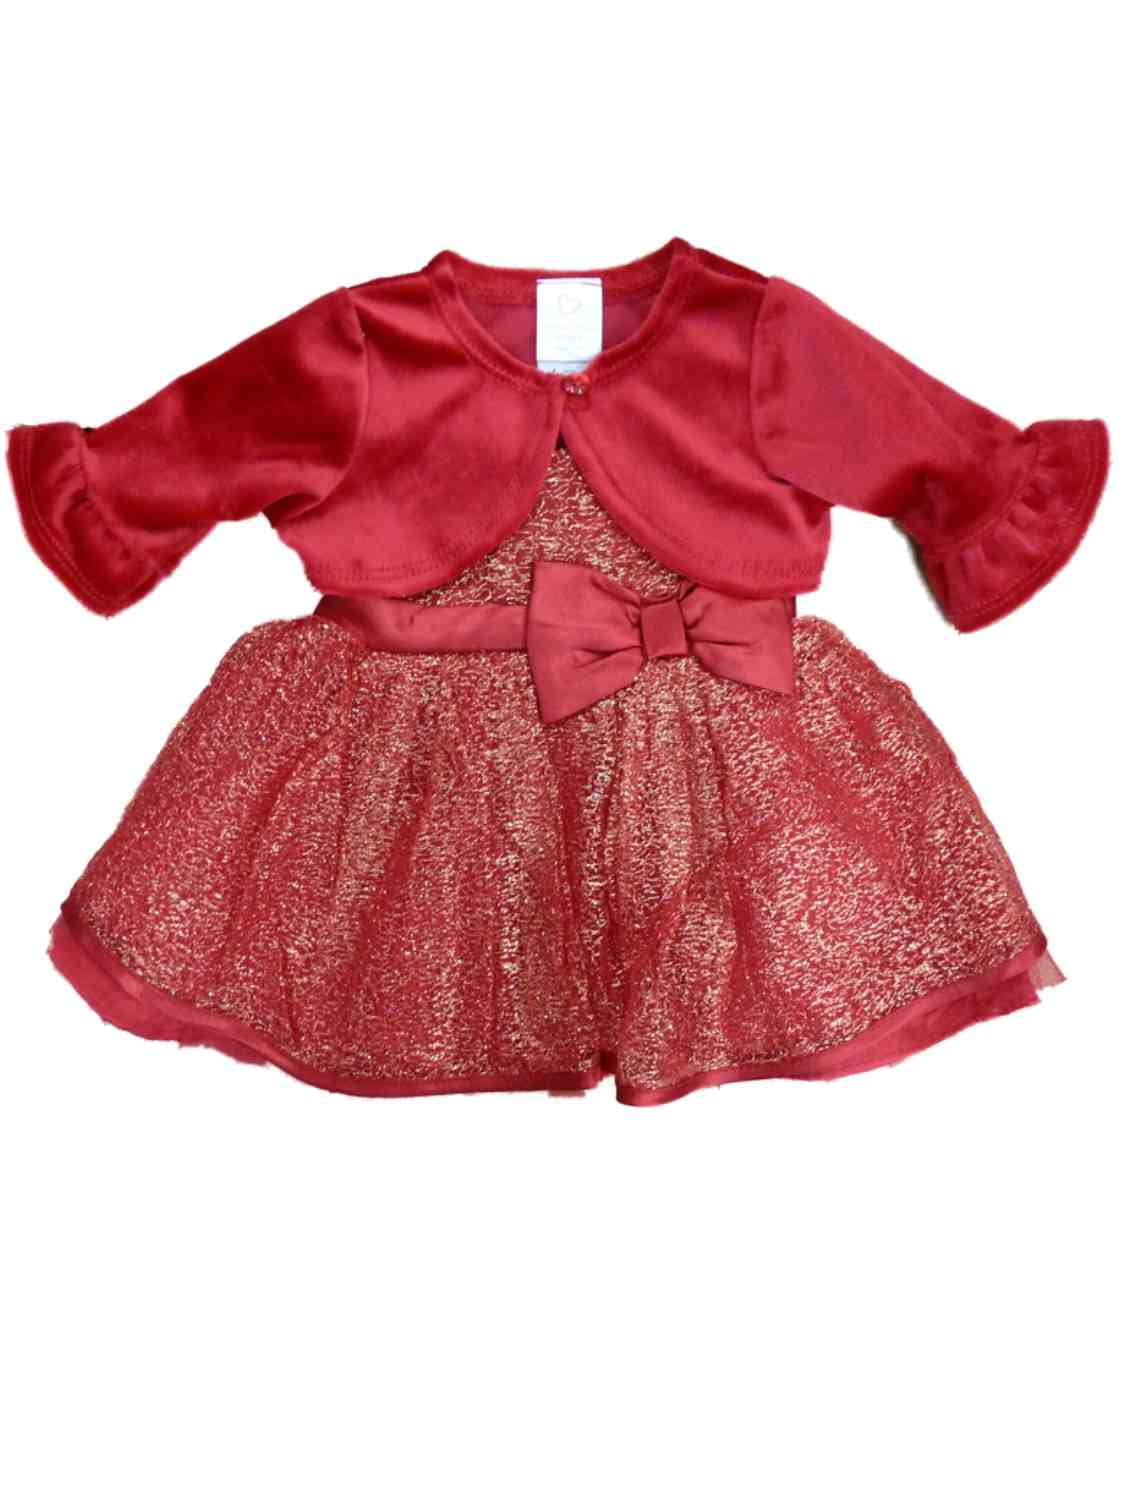 Lilax Little Girls' Holiday Christmas Santa Sparkle Hood Red Dress with Belt 7 